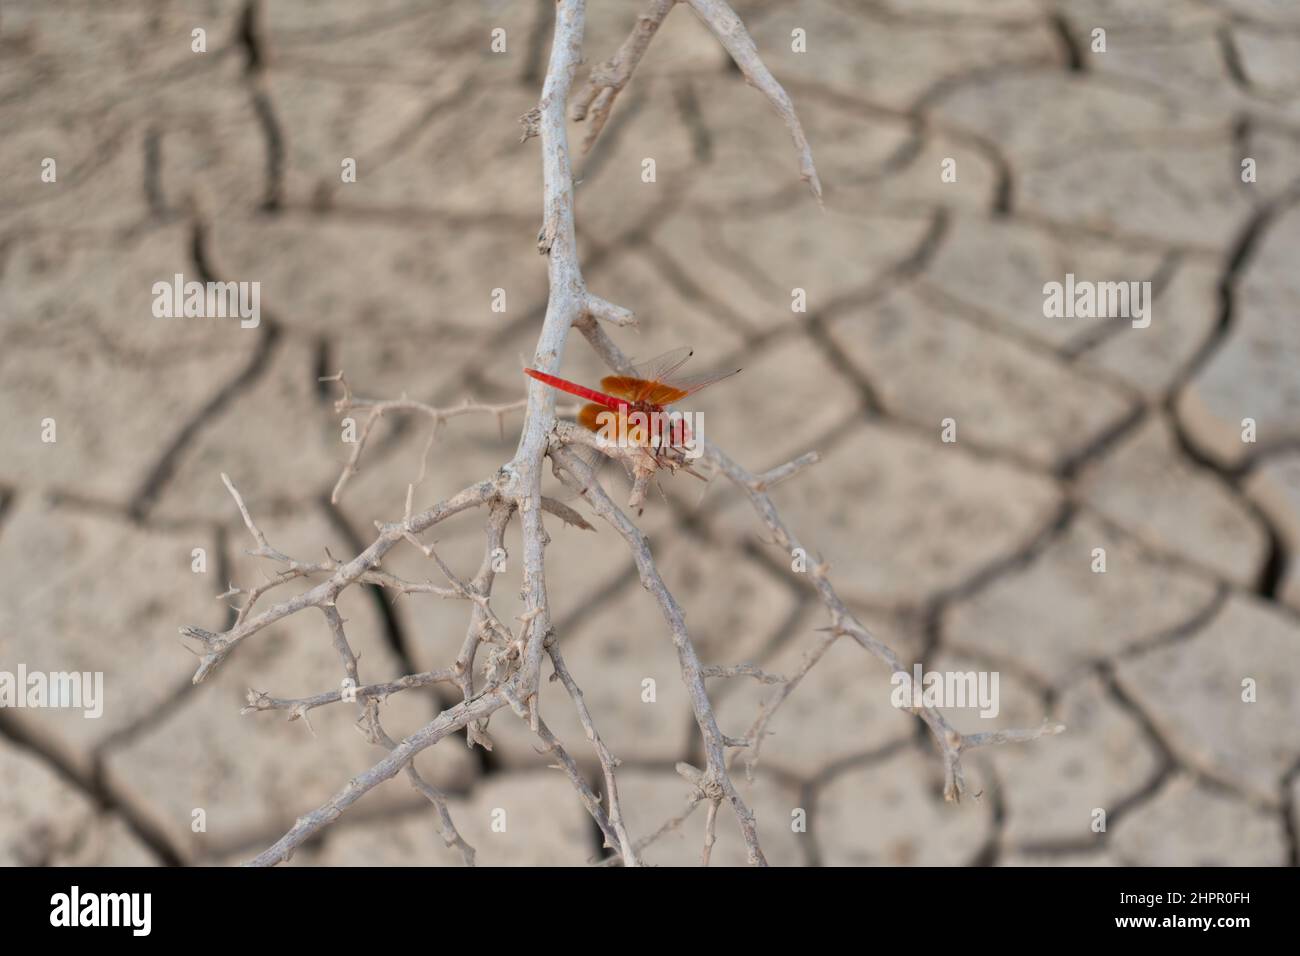 Selective focus on a rare red Omani dragonfly (Urothemis thomasi), perched on a dried up branch on a dry parched desert landscape at a wadi in Ras Al Stock Photo